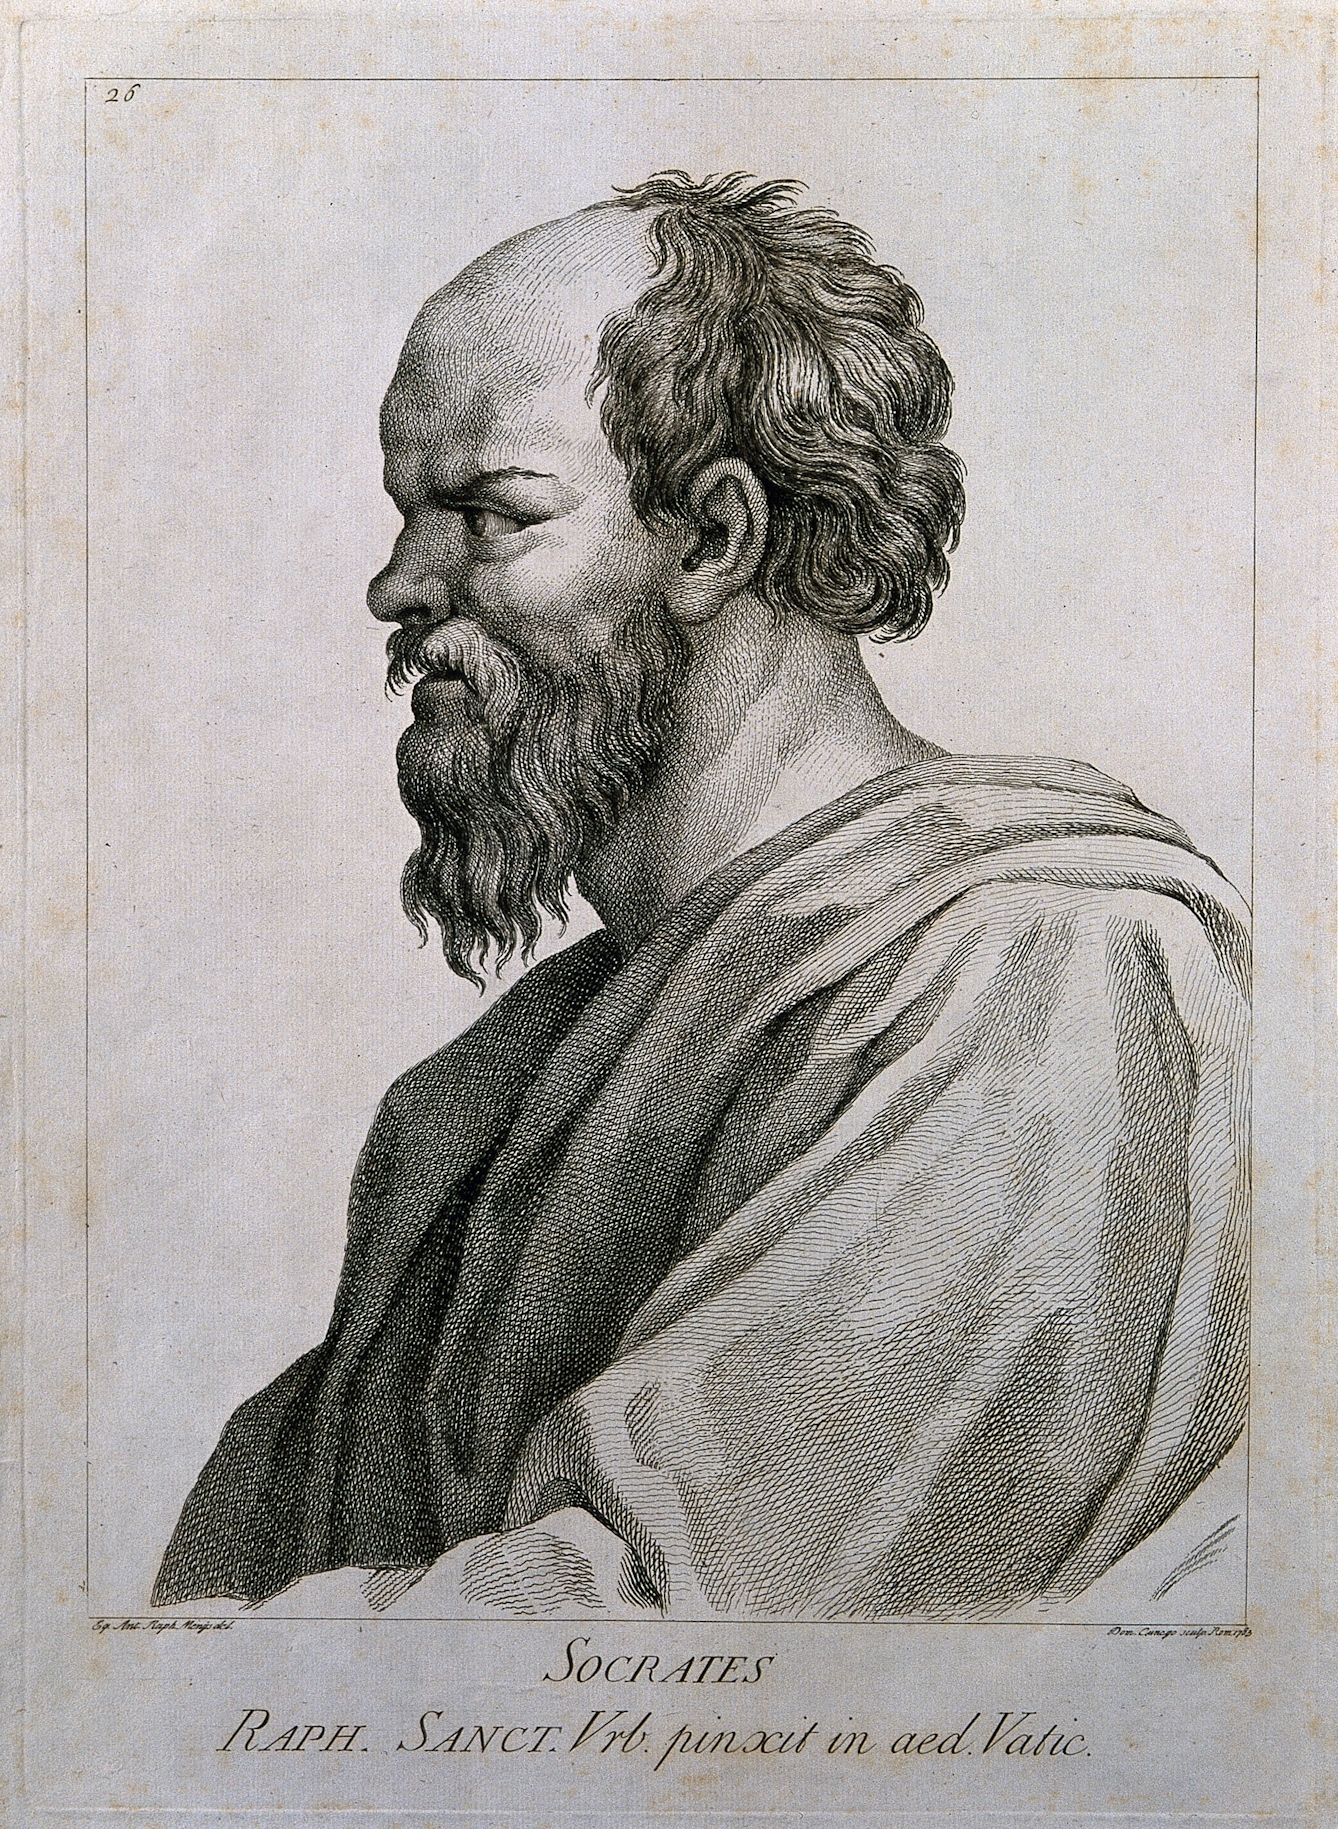 Black and white line engraving of a bearded, balding man in profile.